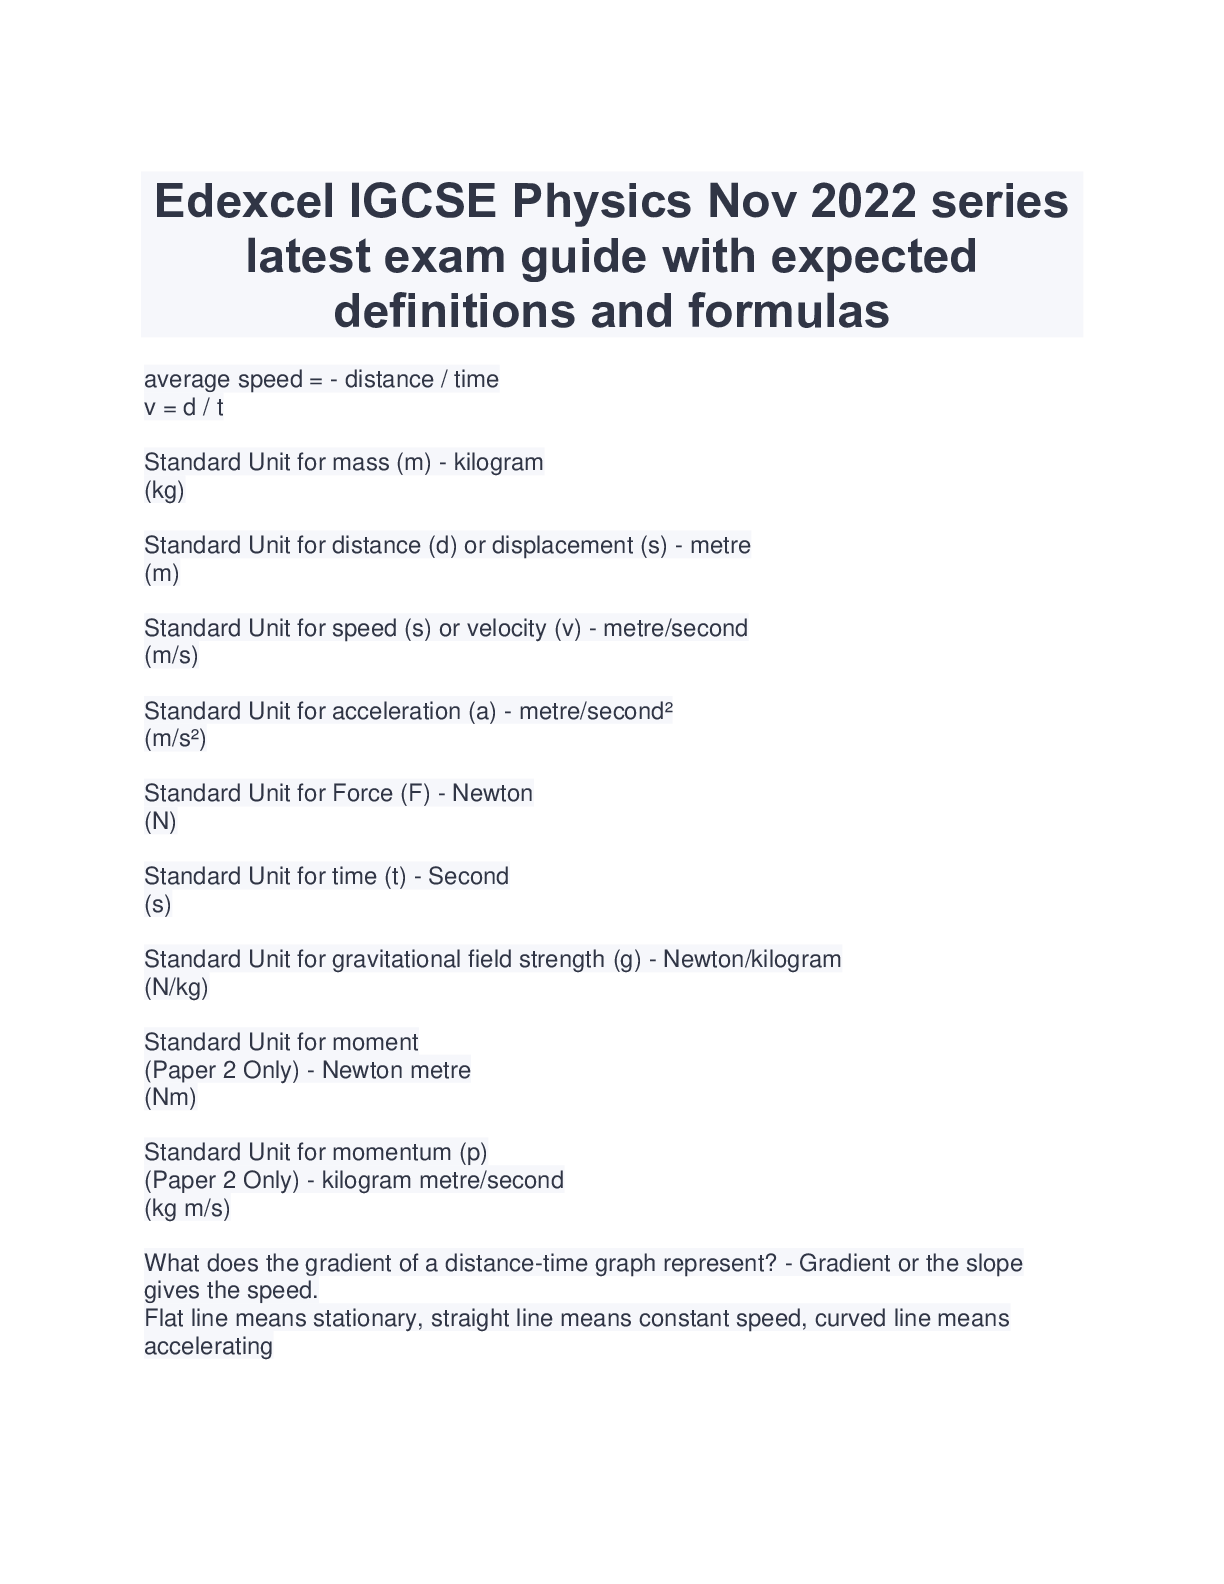 Edexcel IGCSE Physics Nov 2022 series latest exam guide with expected